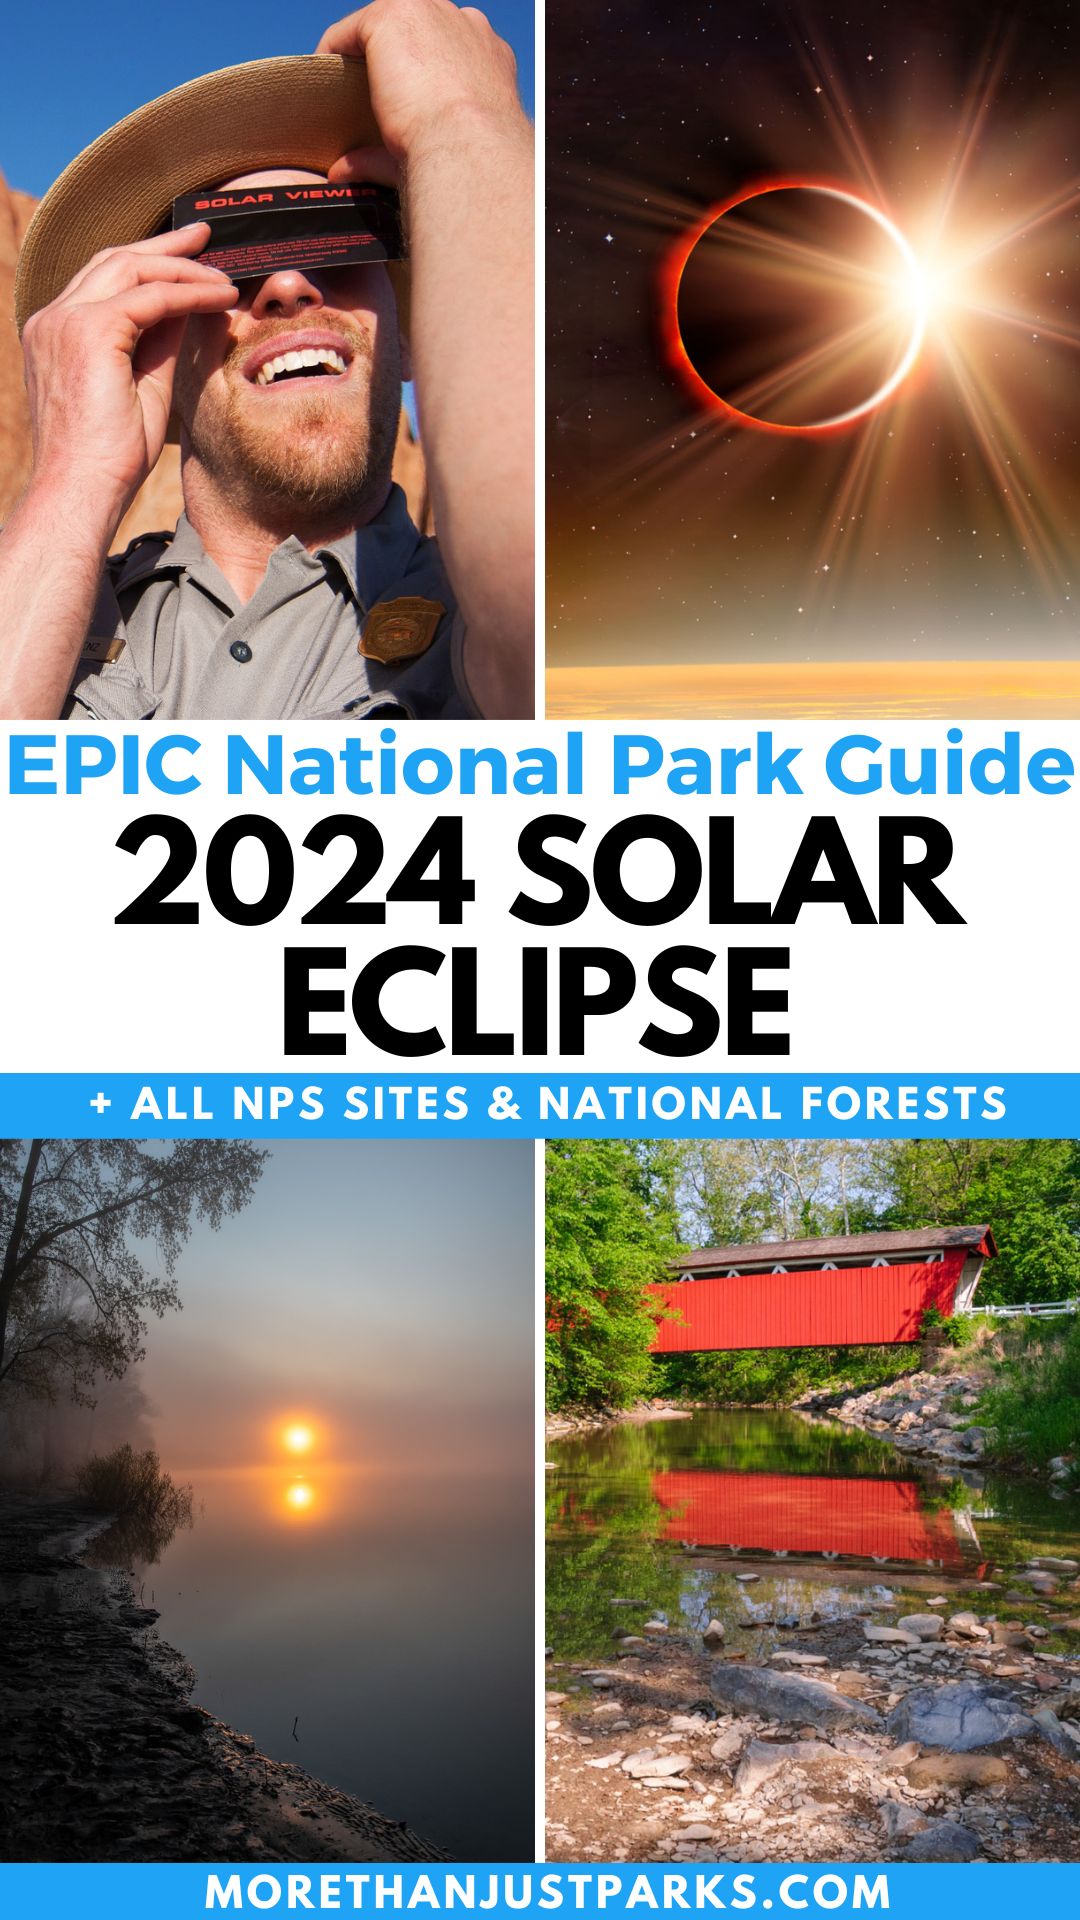 Graphics Reads "EPIC National Park Guide for 2024 Solar Eclipse Plus All NPS Sites & National Forests"